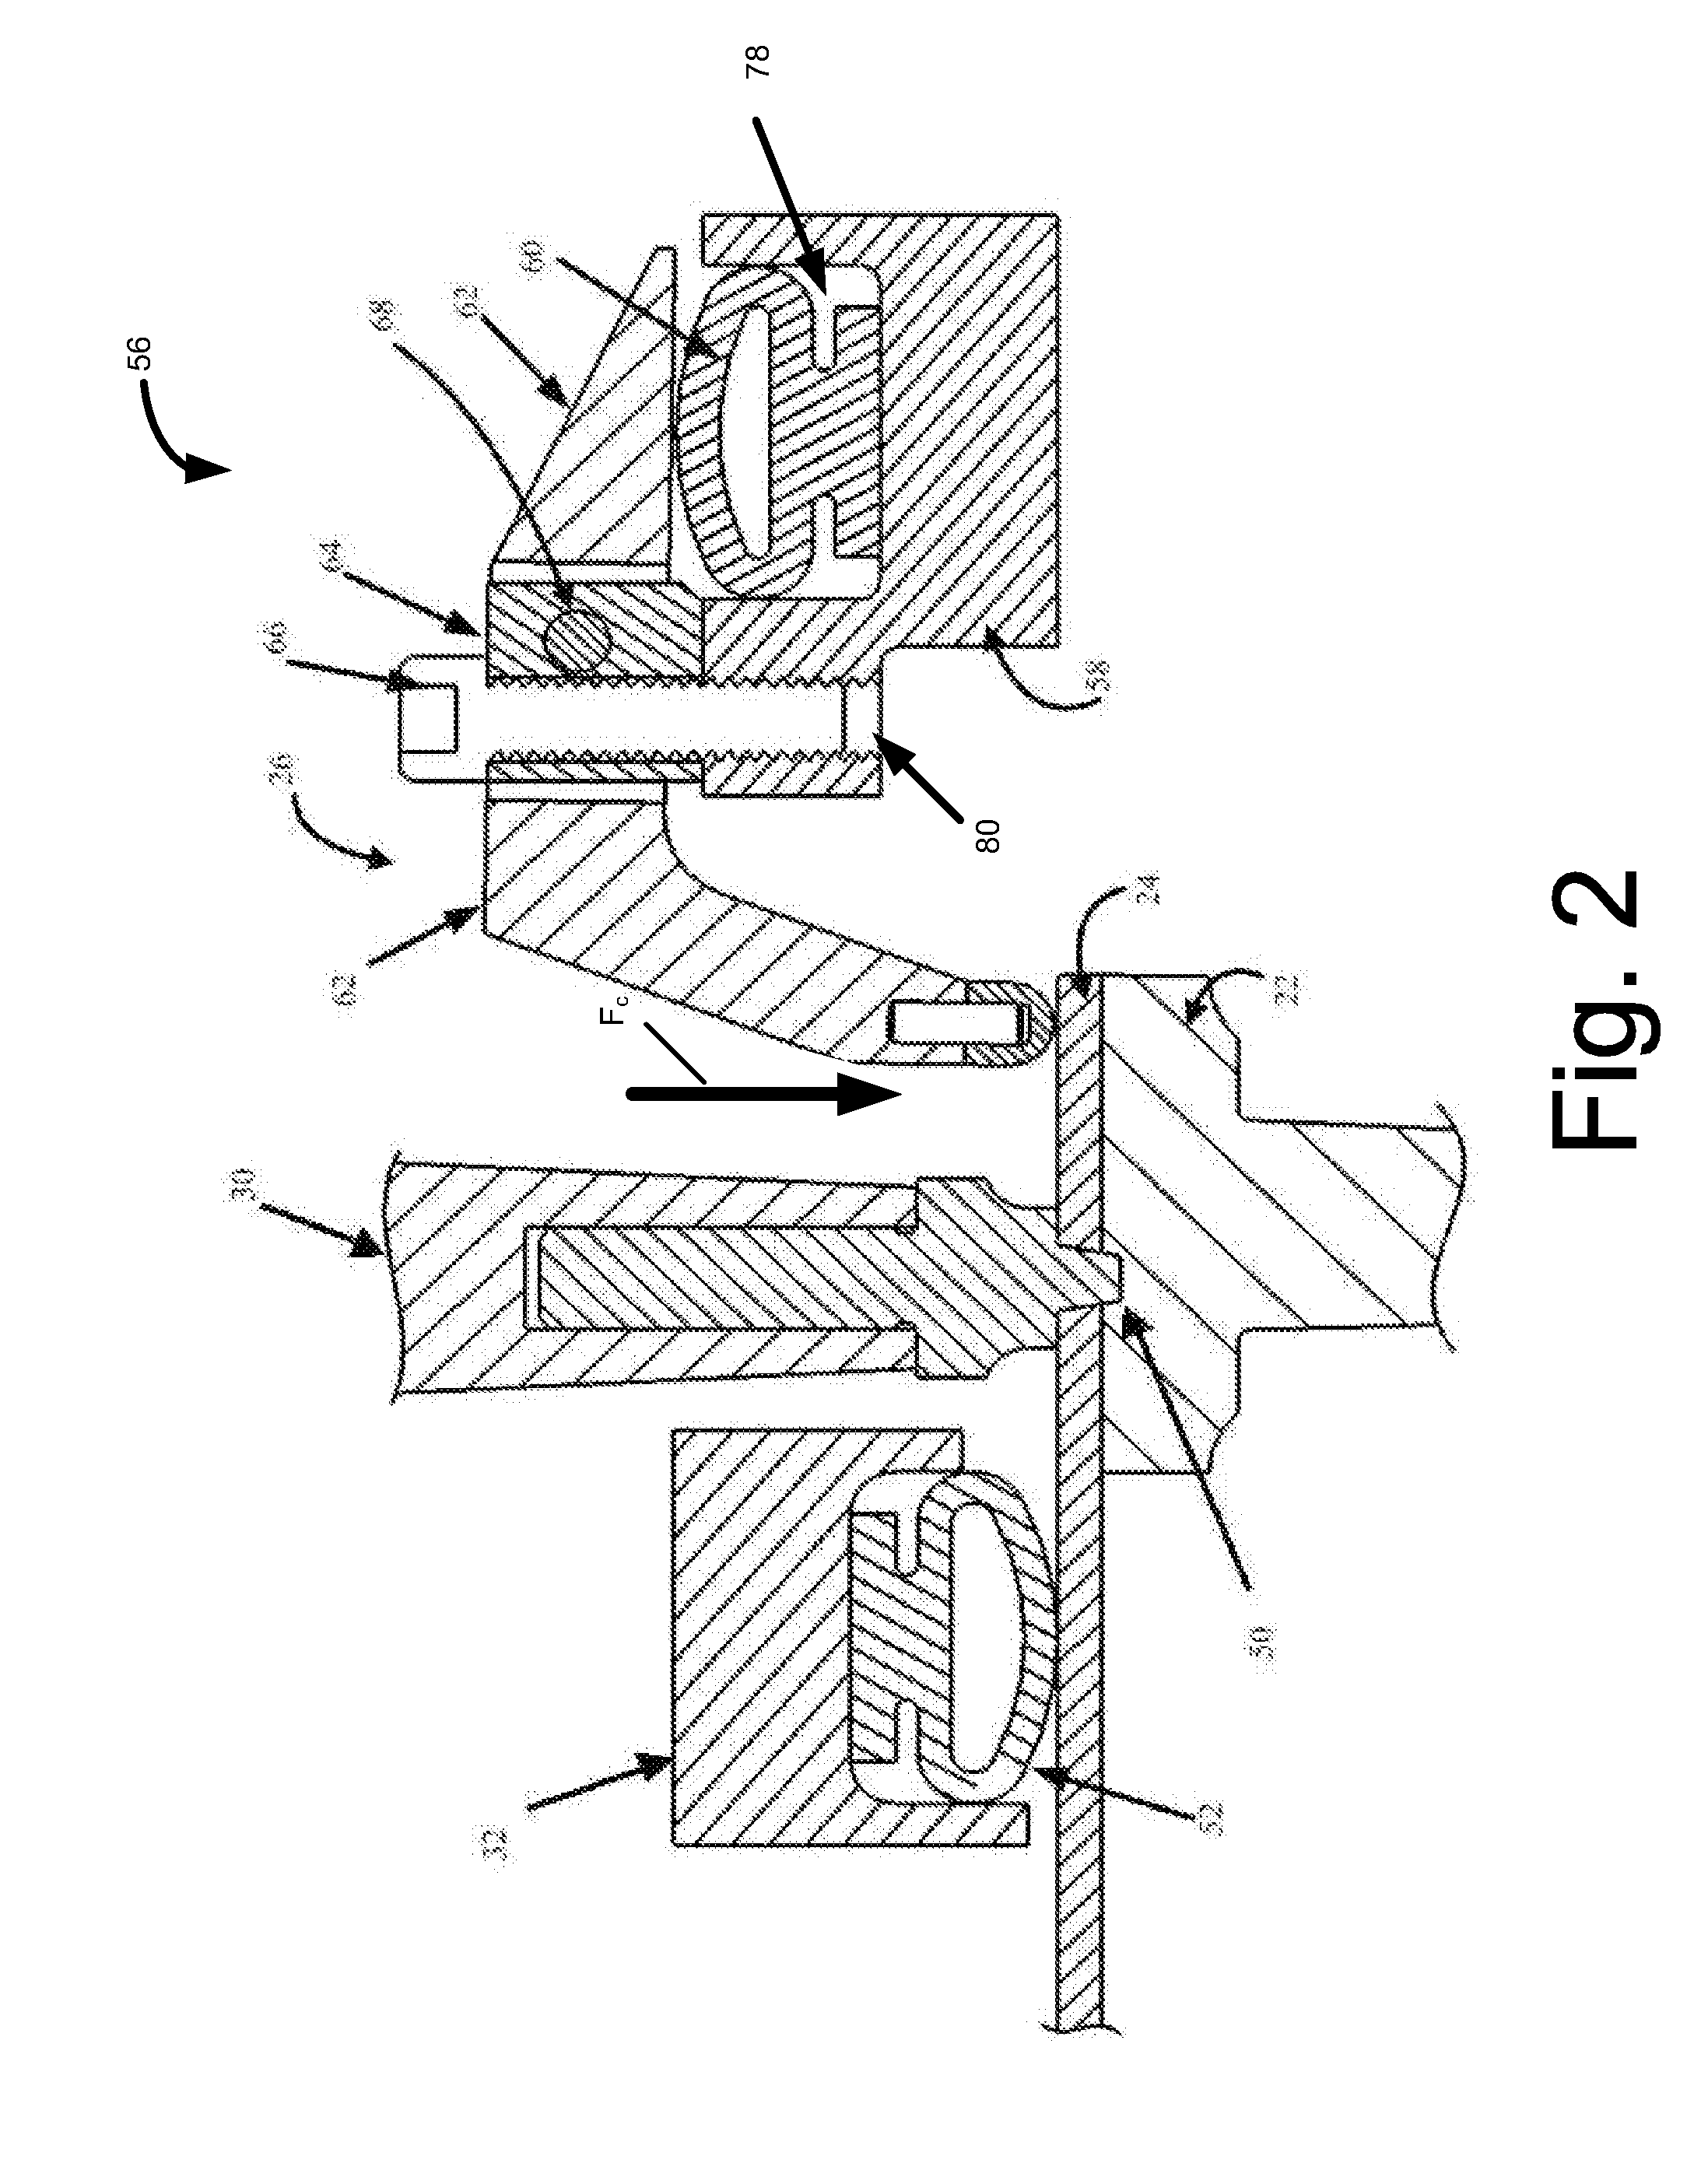 Reconfigurable Low-Profile Pneumatic Edge-Clamp Systems and Methods